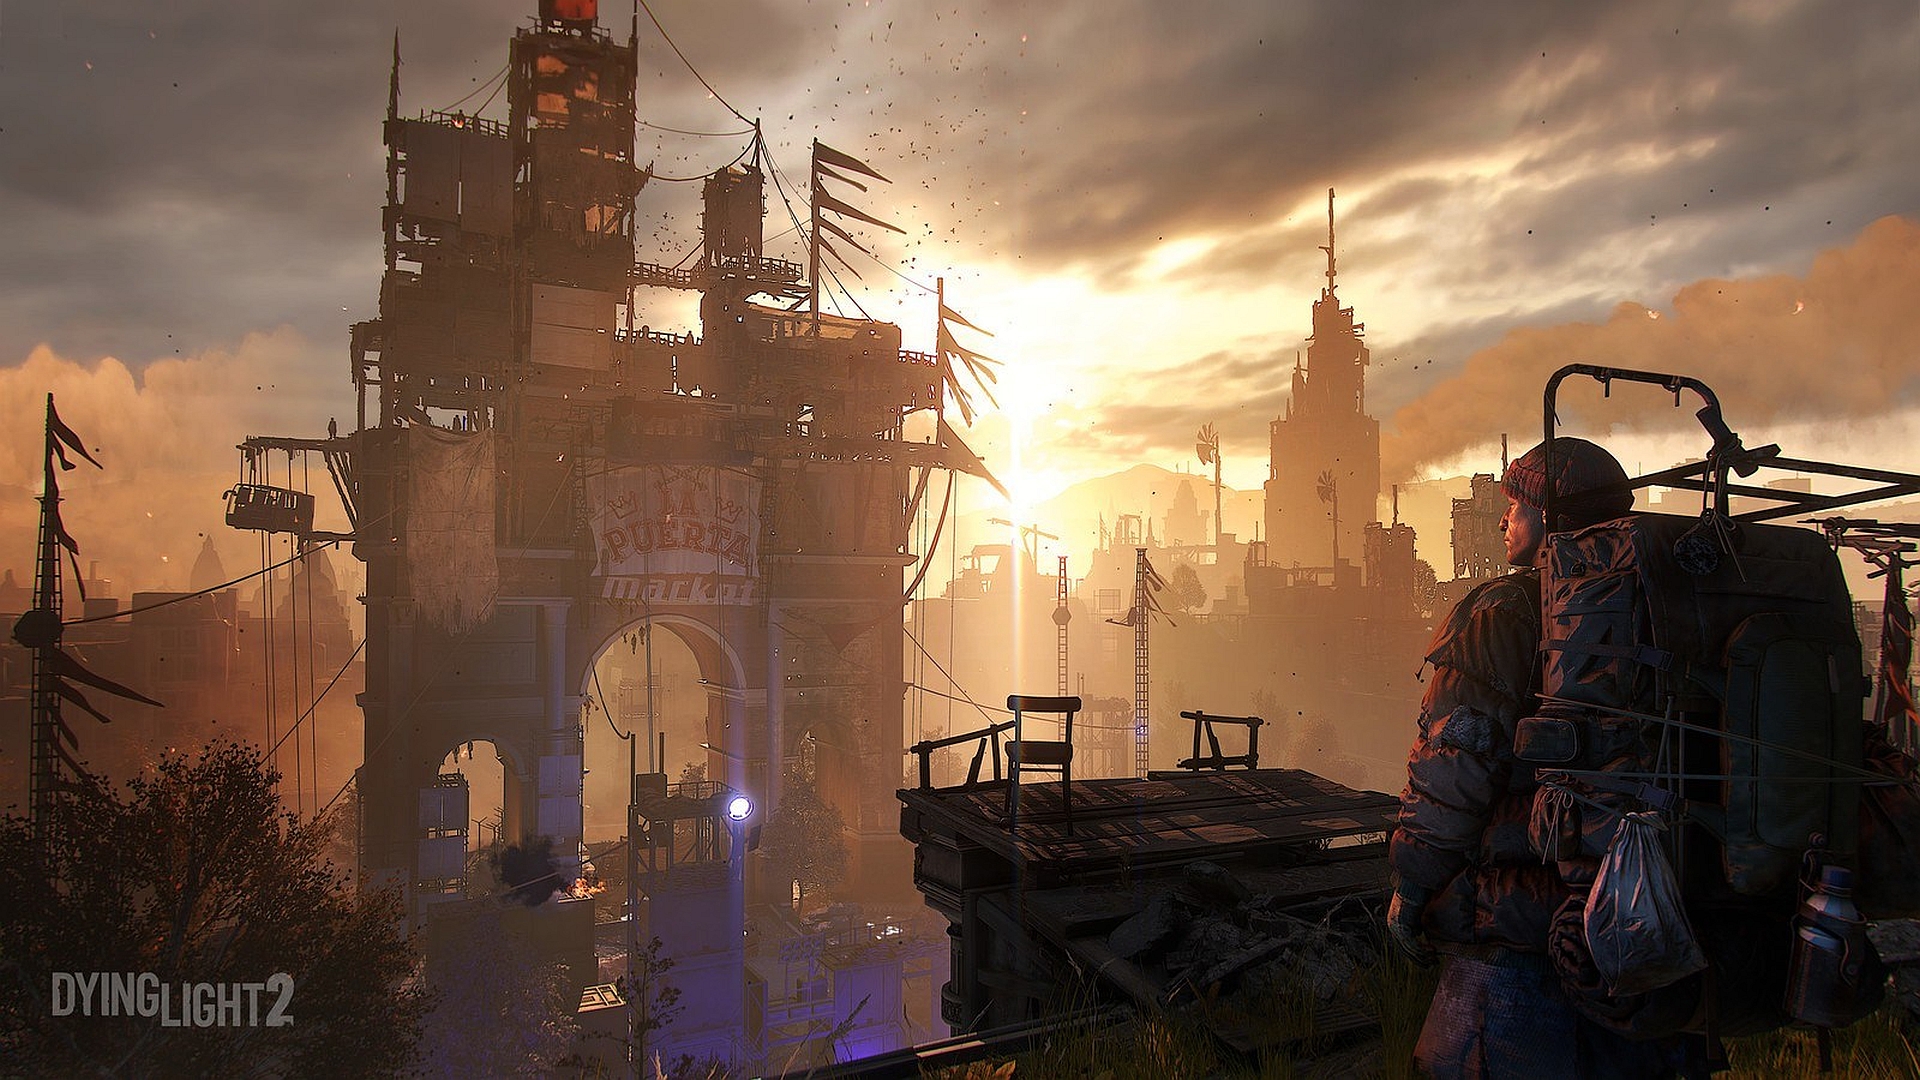 Dying Light 2 PC performance: The best settings for high FPS